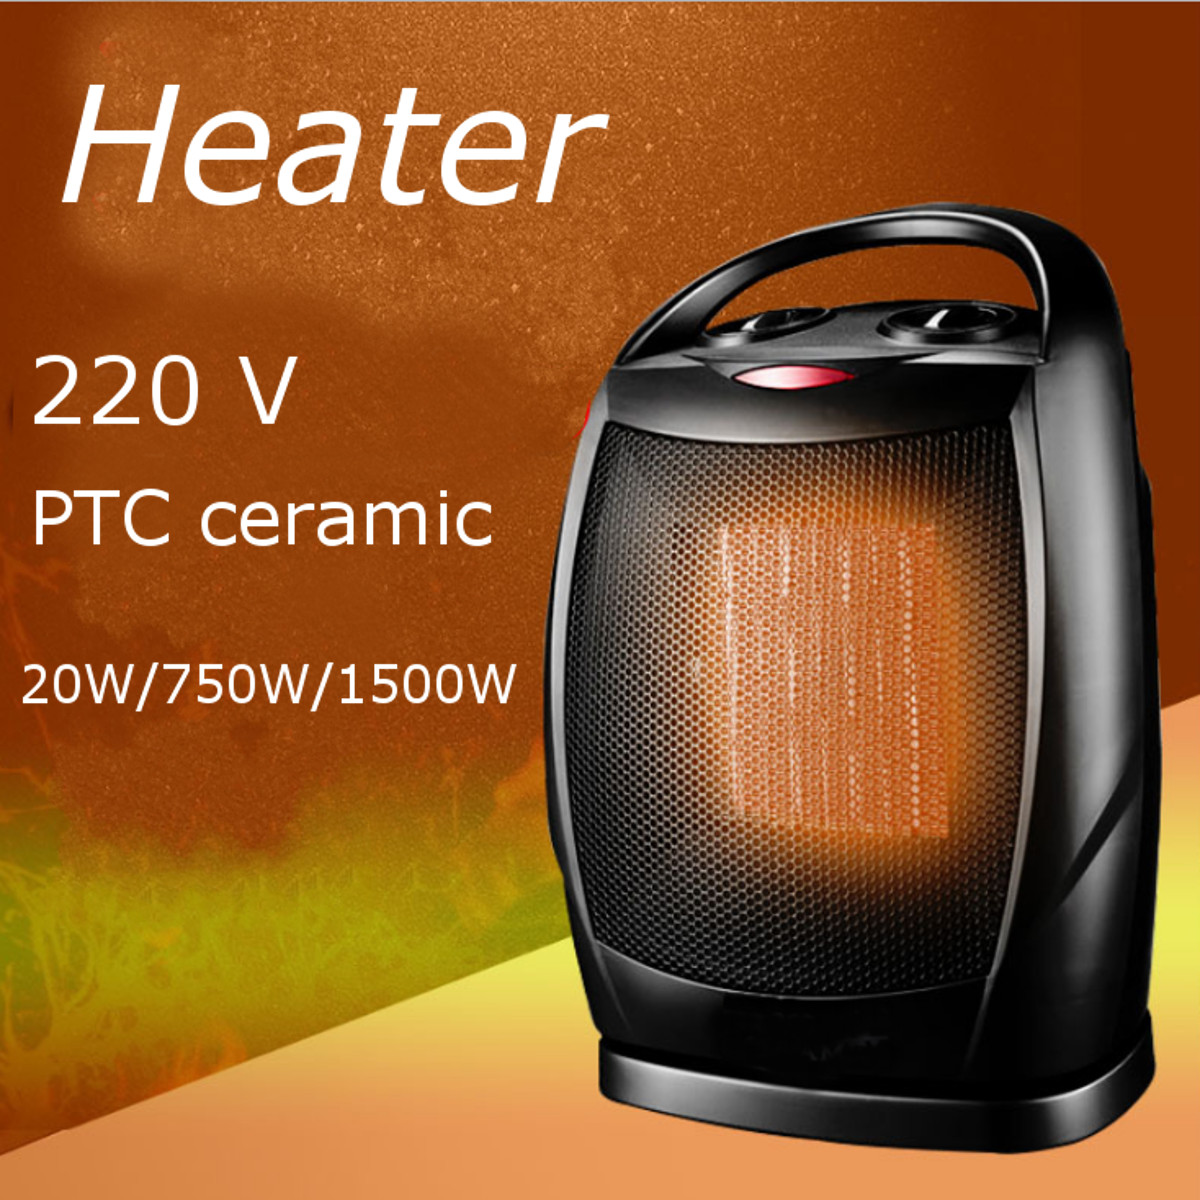 Portable Silent Heater Heating Fan Electric Room Office Thermostat Warm Machine 10